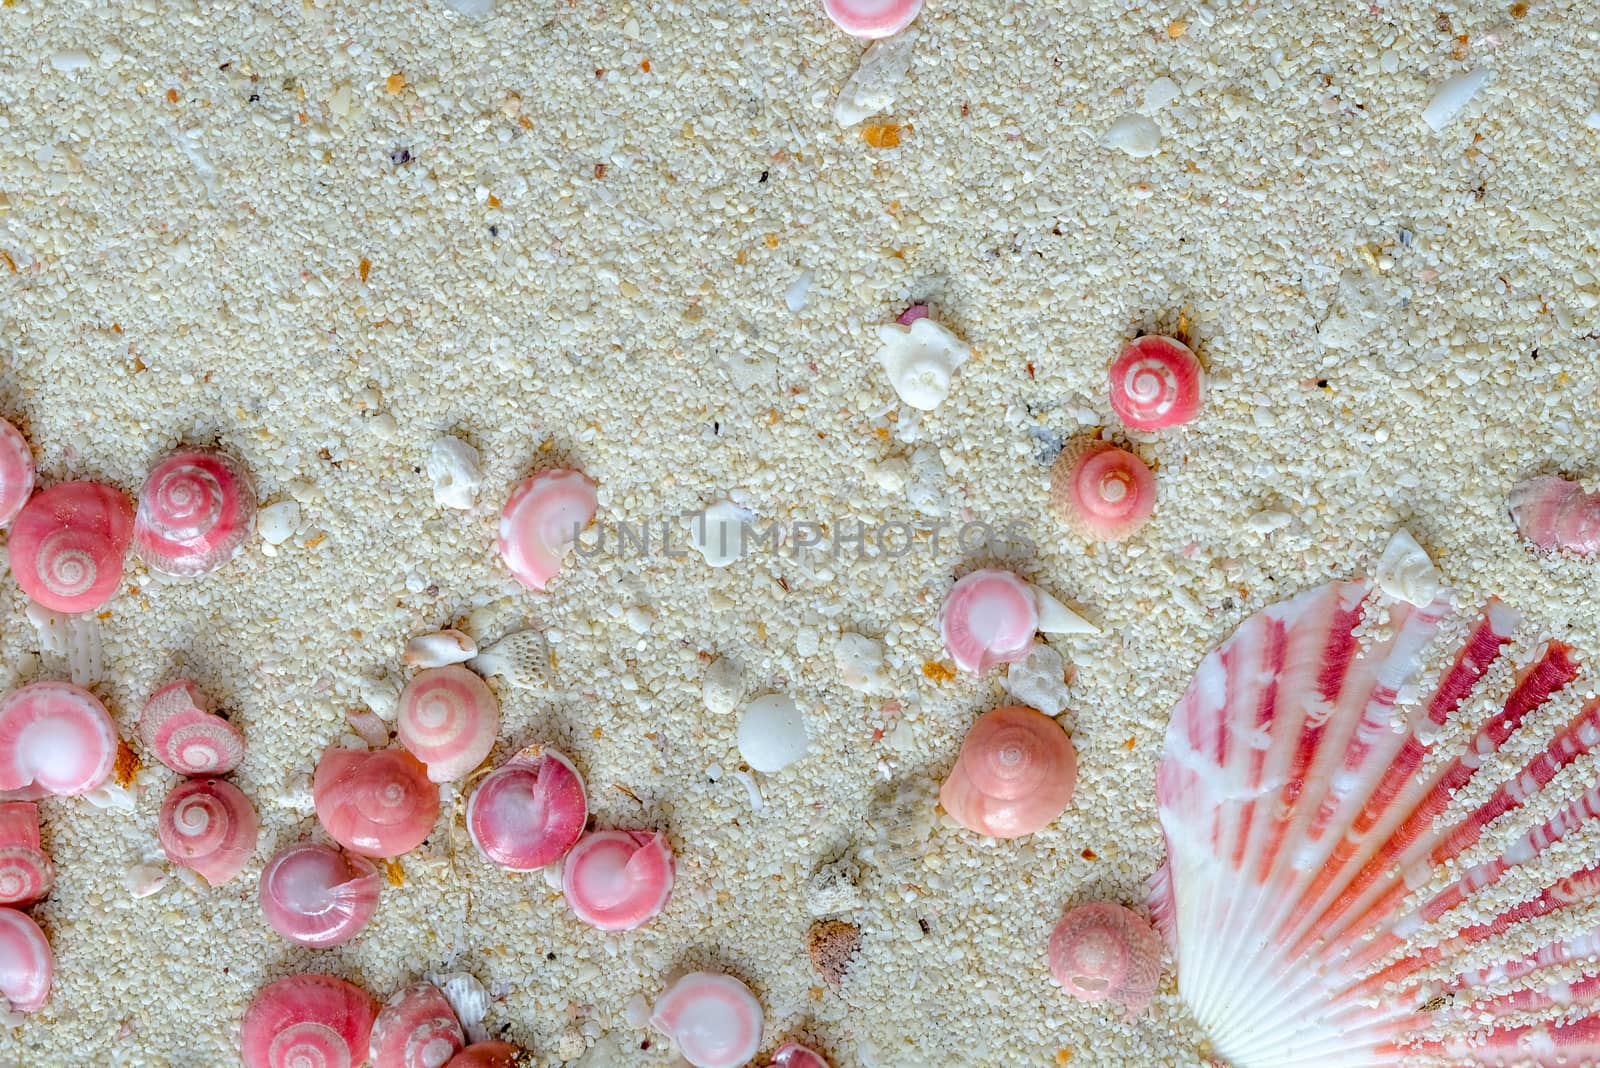 shells of pink button snails and scallop by Nawoot